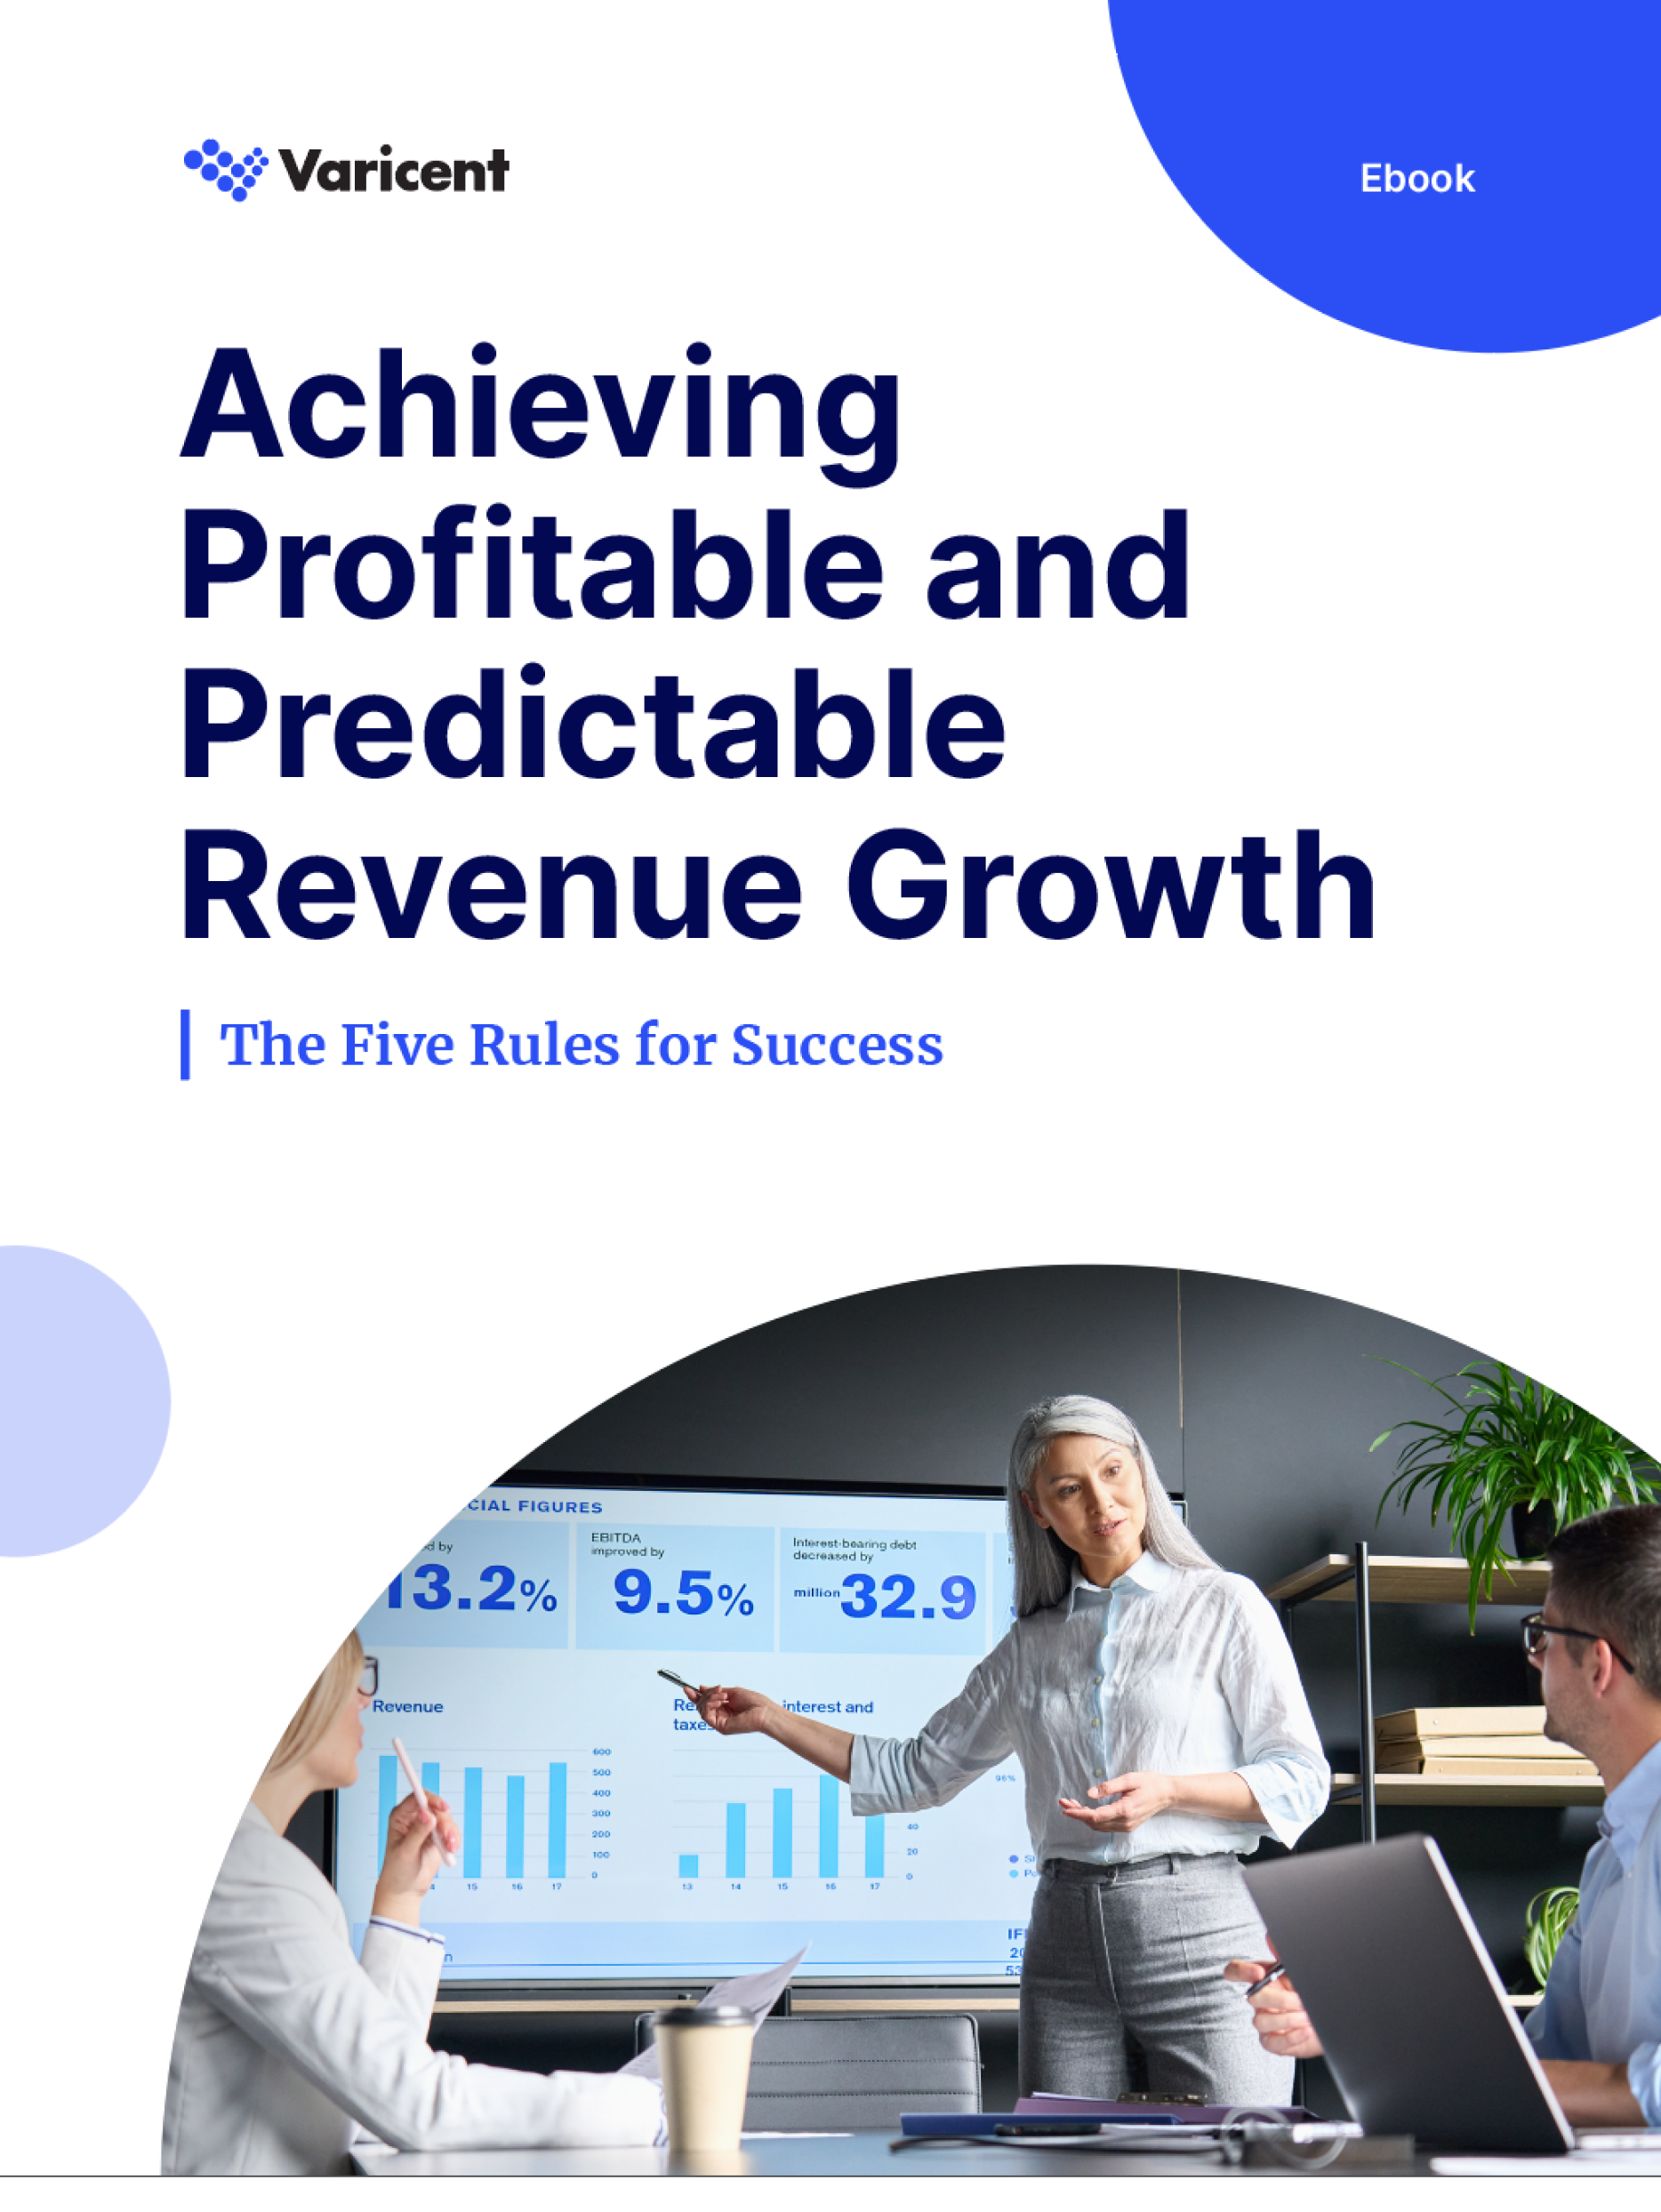 Successfully achieve profitable and predictable revenue growth with Varicent's free eBook. Learn actionable insights and expert advice to strengthen your teams today.